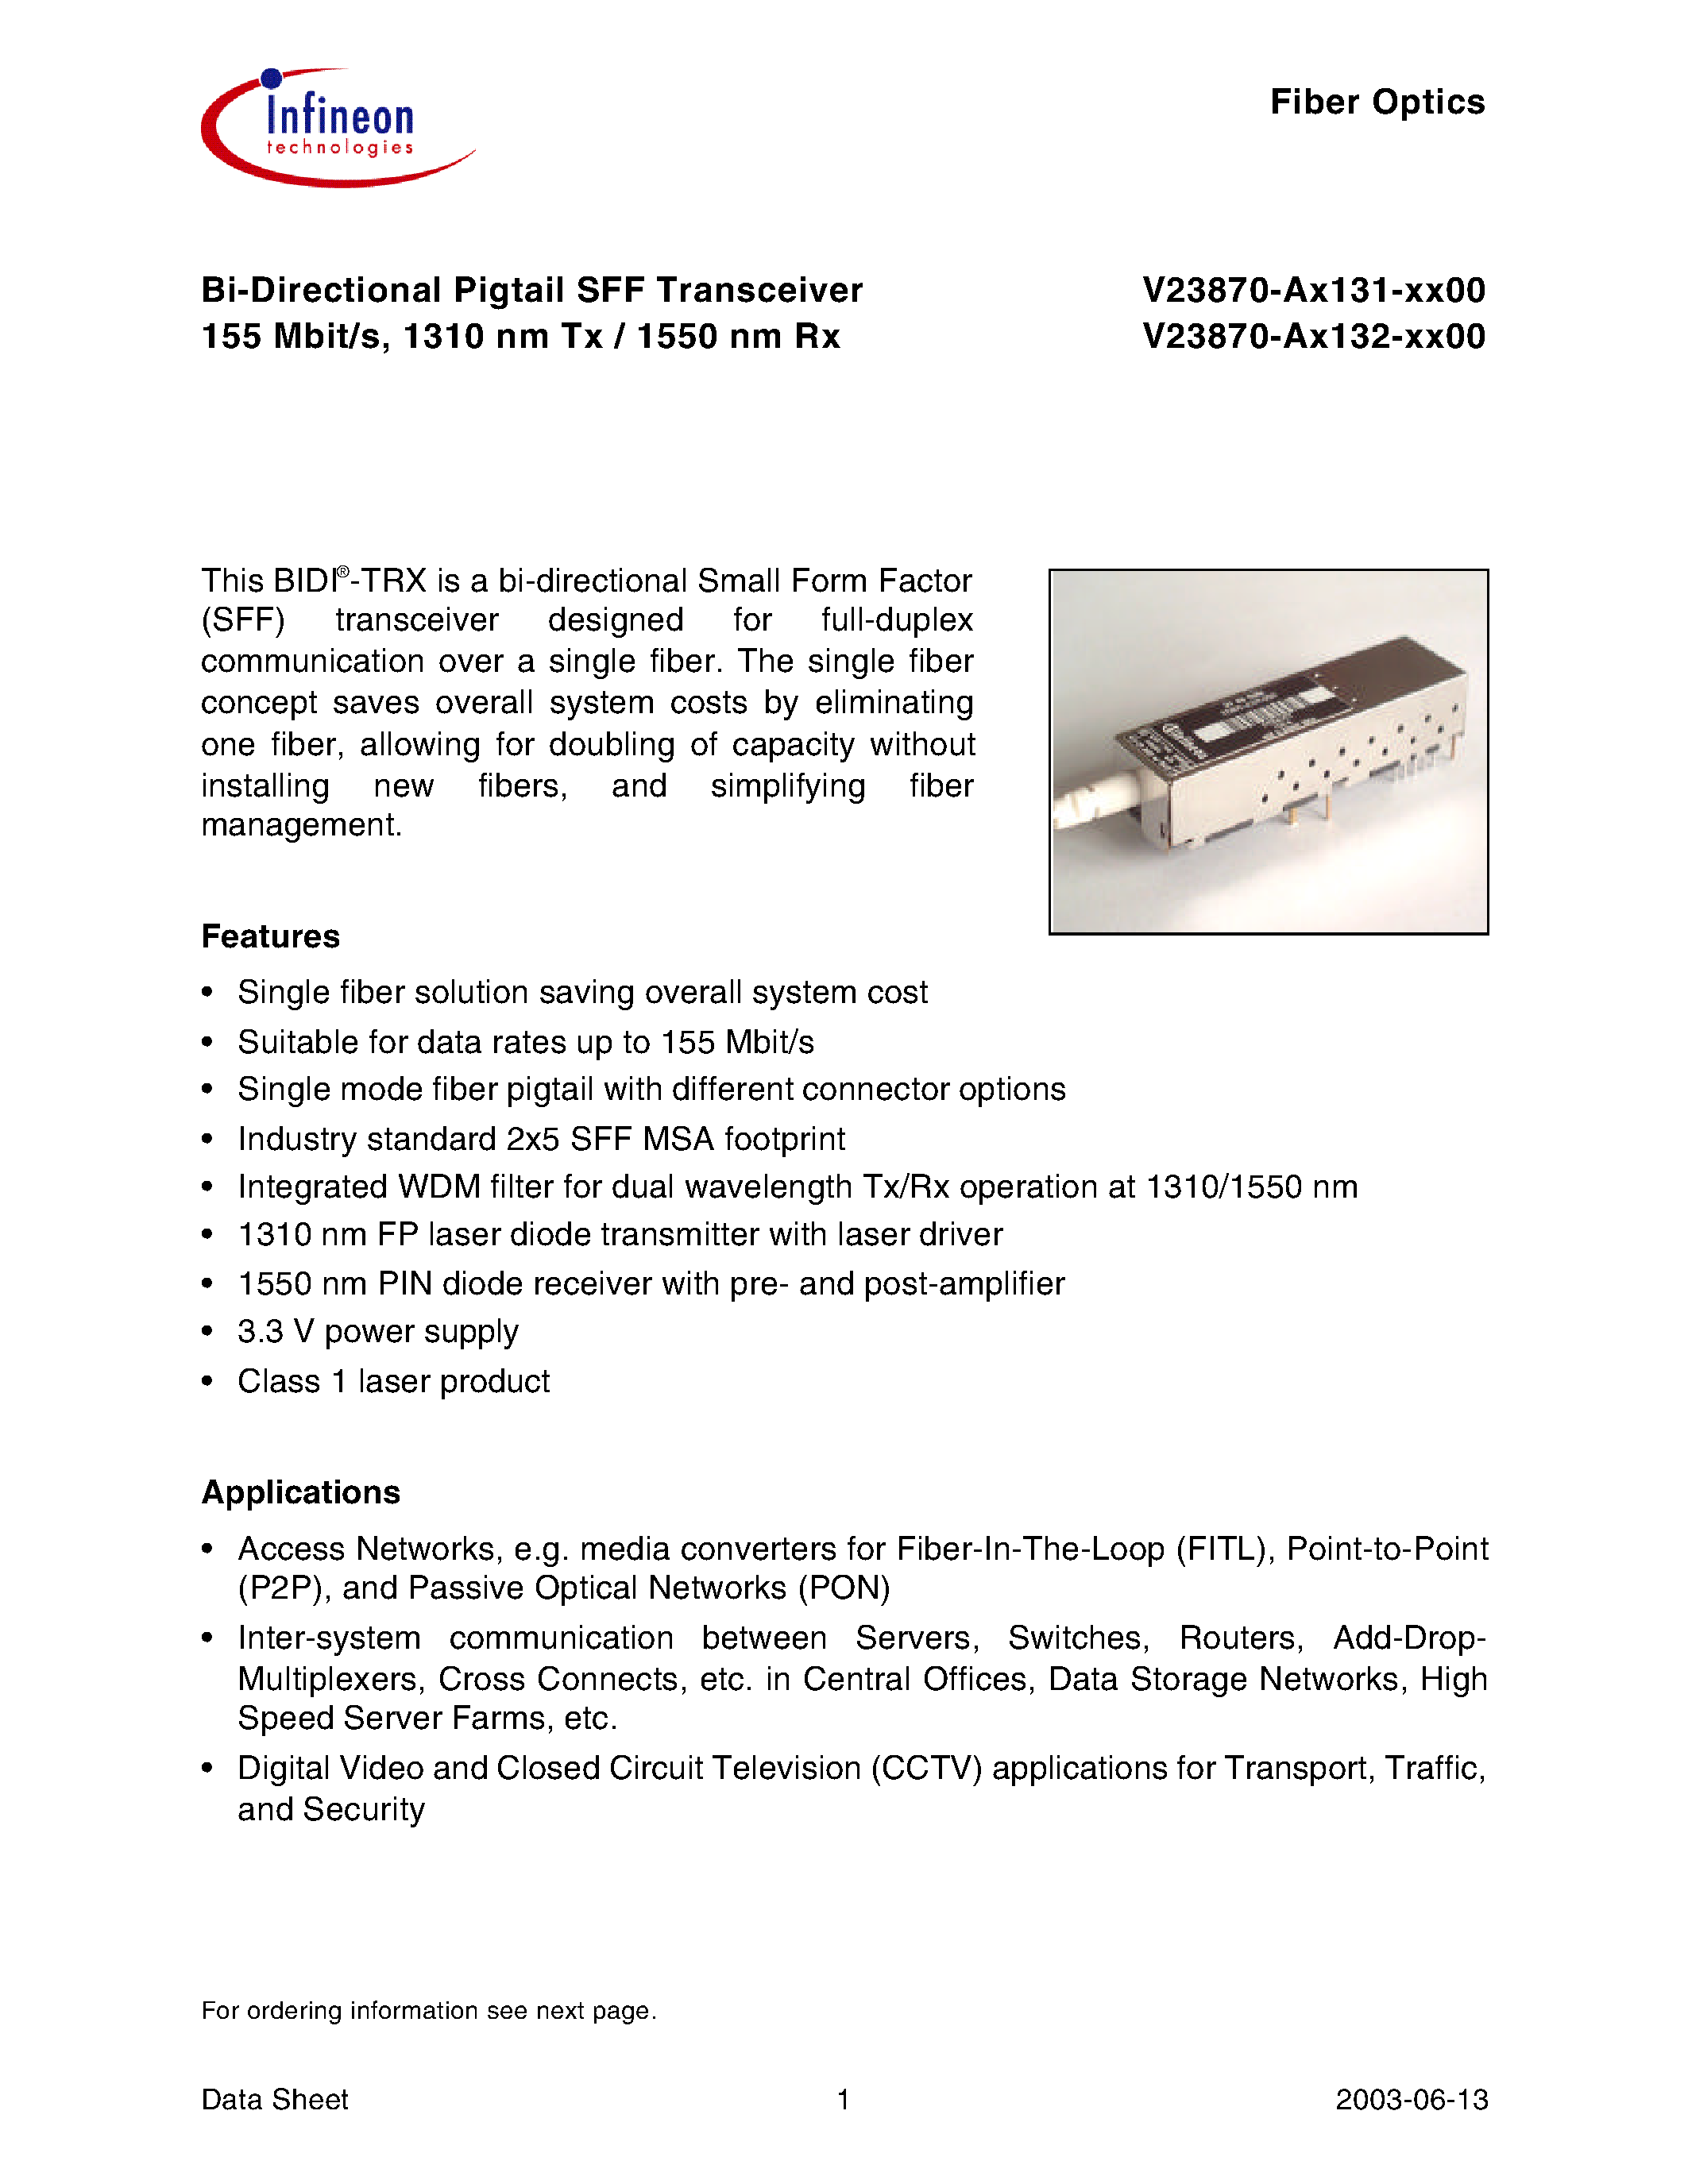 Datasheet V23870-A1132-F600 - Bi-Directional Pigtail SFF Transceiver 155 Mbit/s/ 1310 nm Tx / 1550 nm Rx page 1